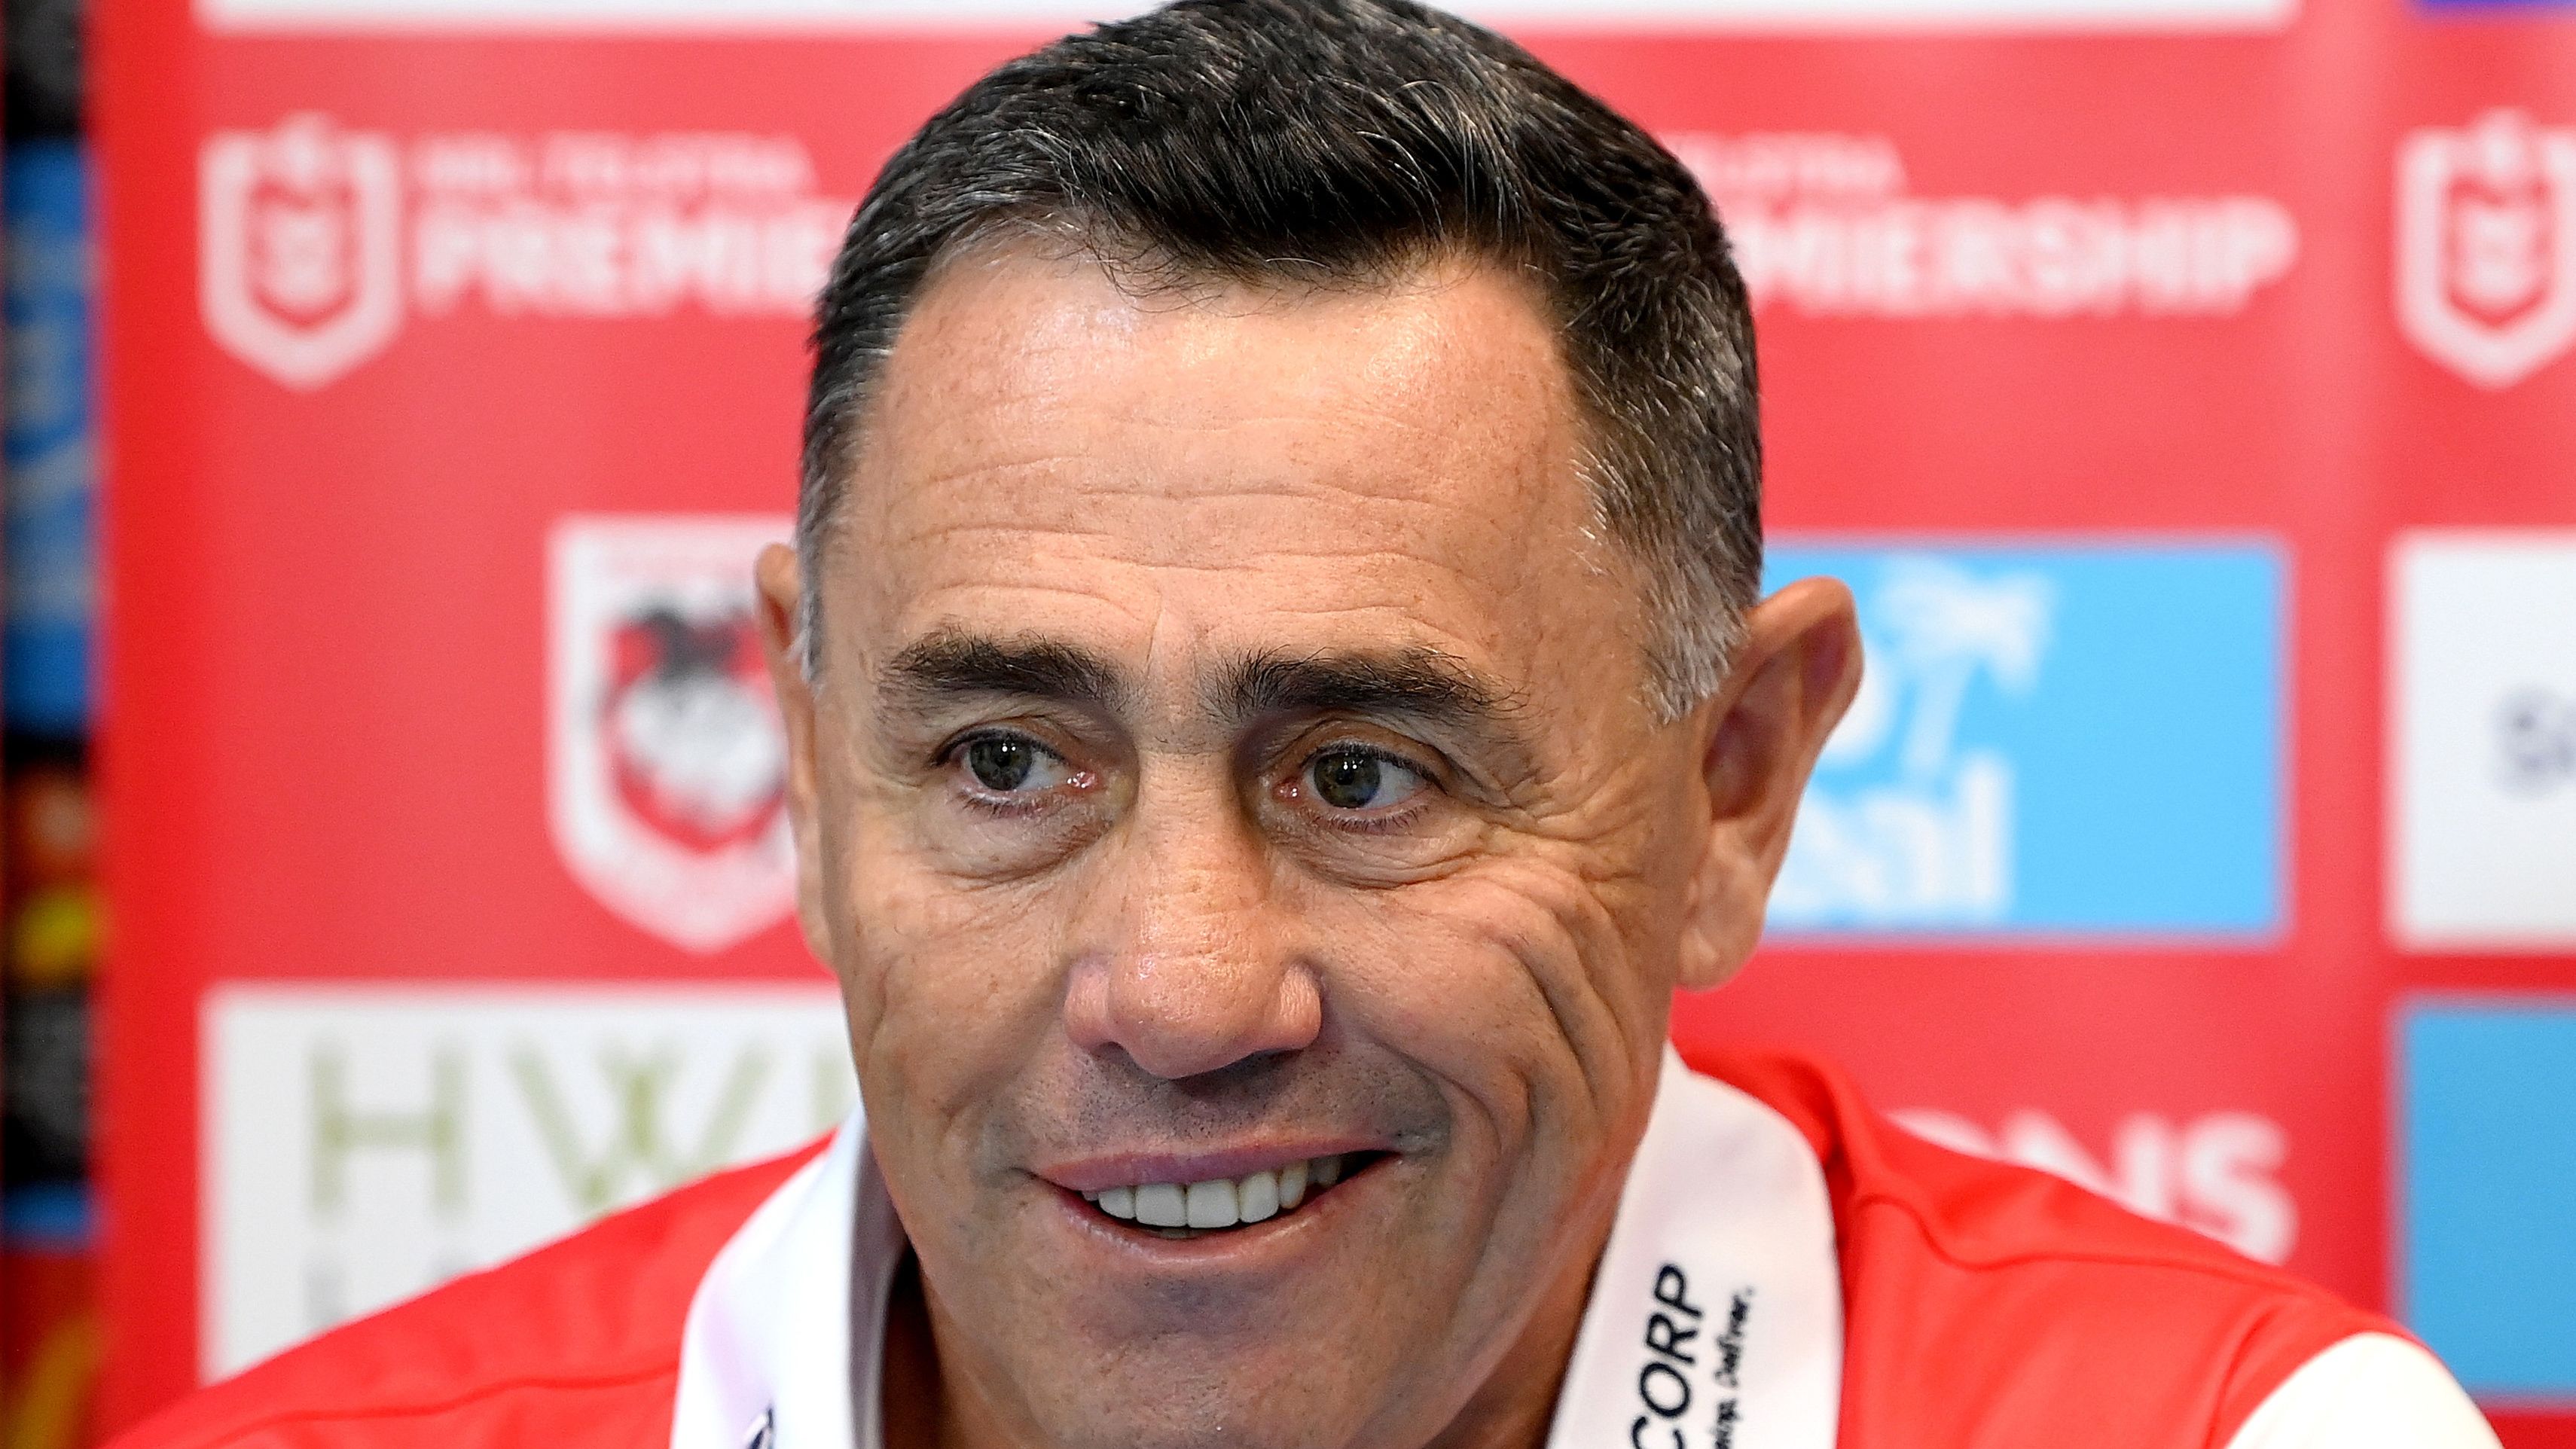 'It won't happen': Why new coach Shane Flanagan was 'happy' about Dragons criticism